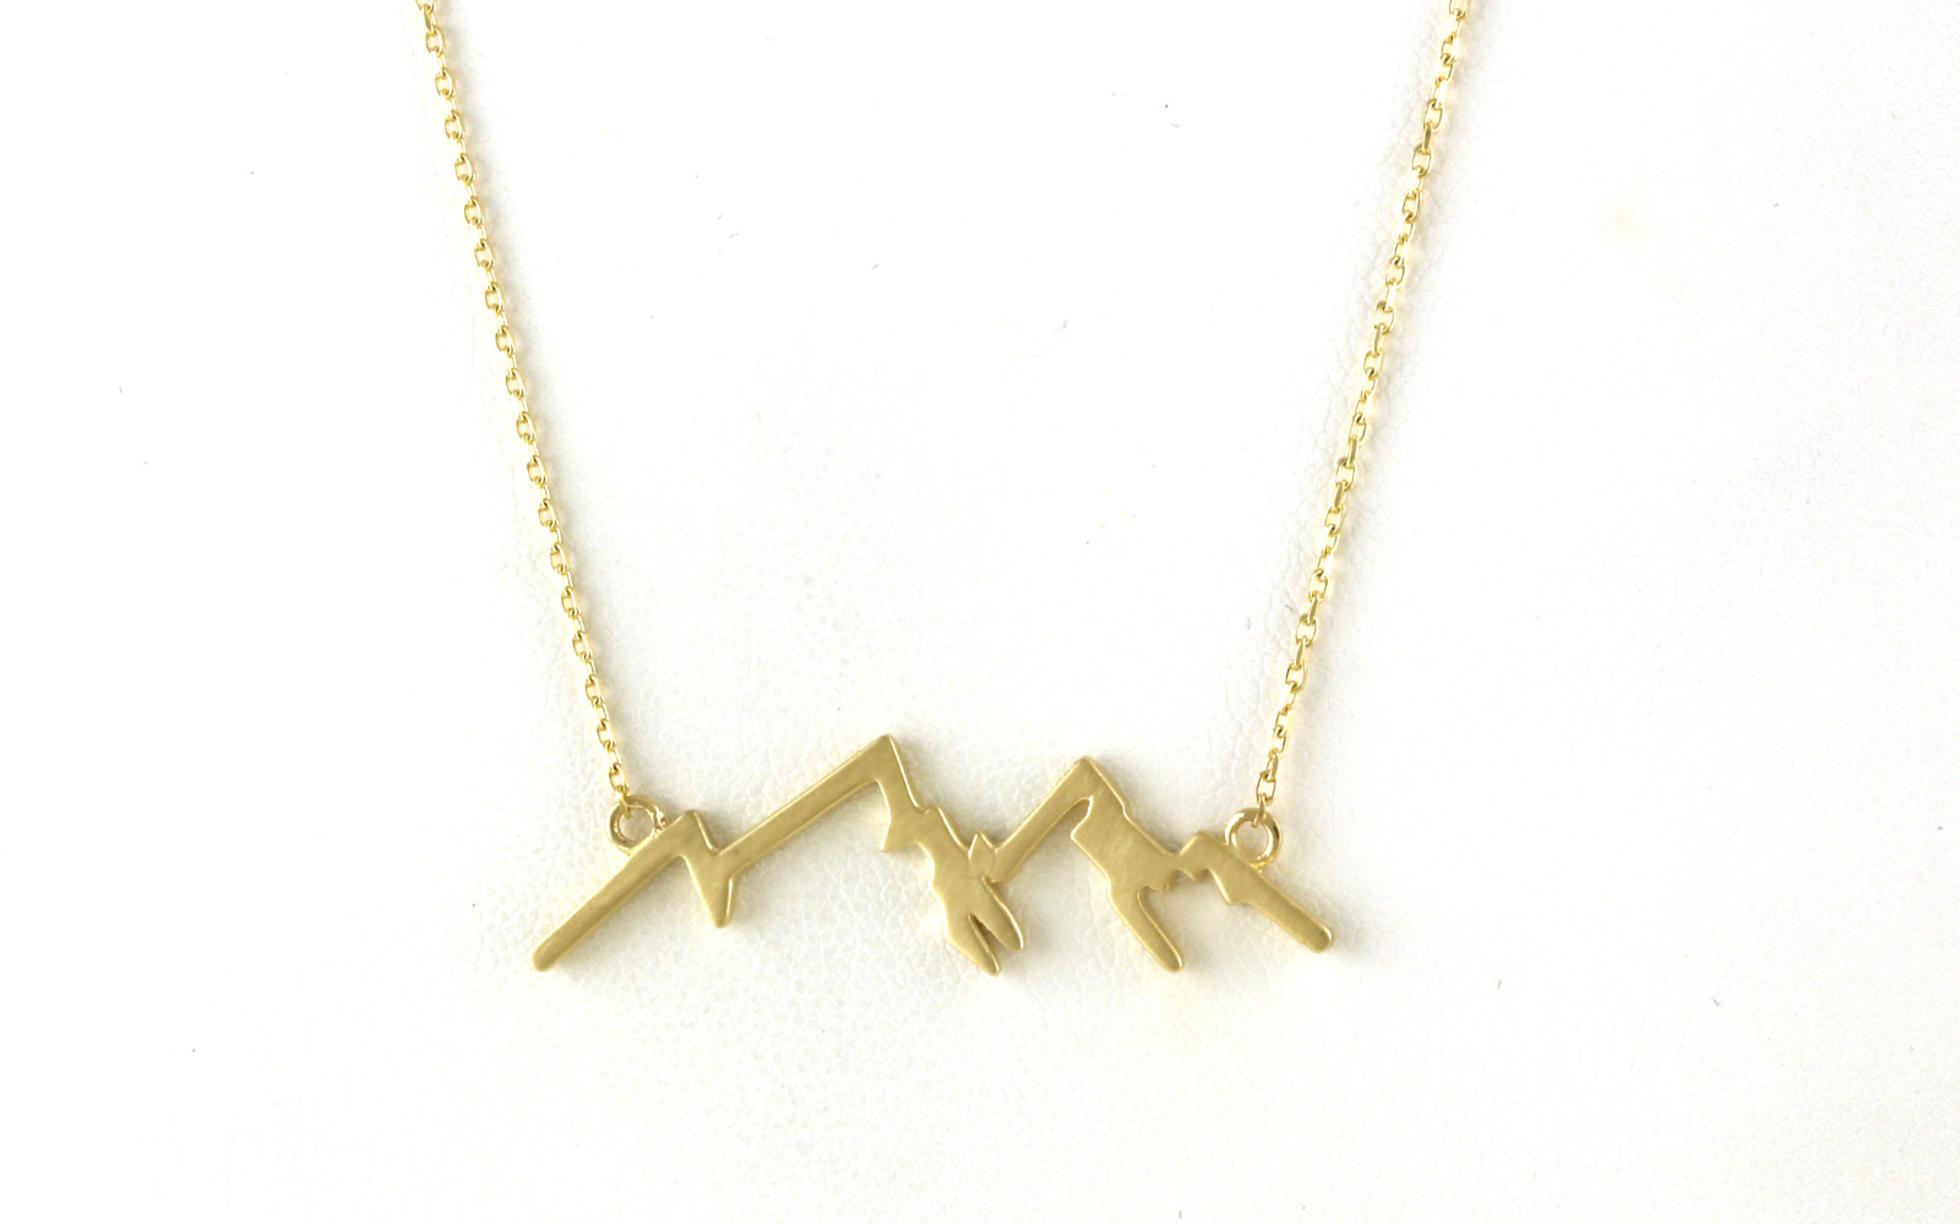 Mountain Ridgeline Necklace on Split Chain with Satin Finish in Yellow Gold